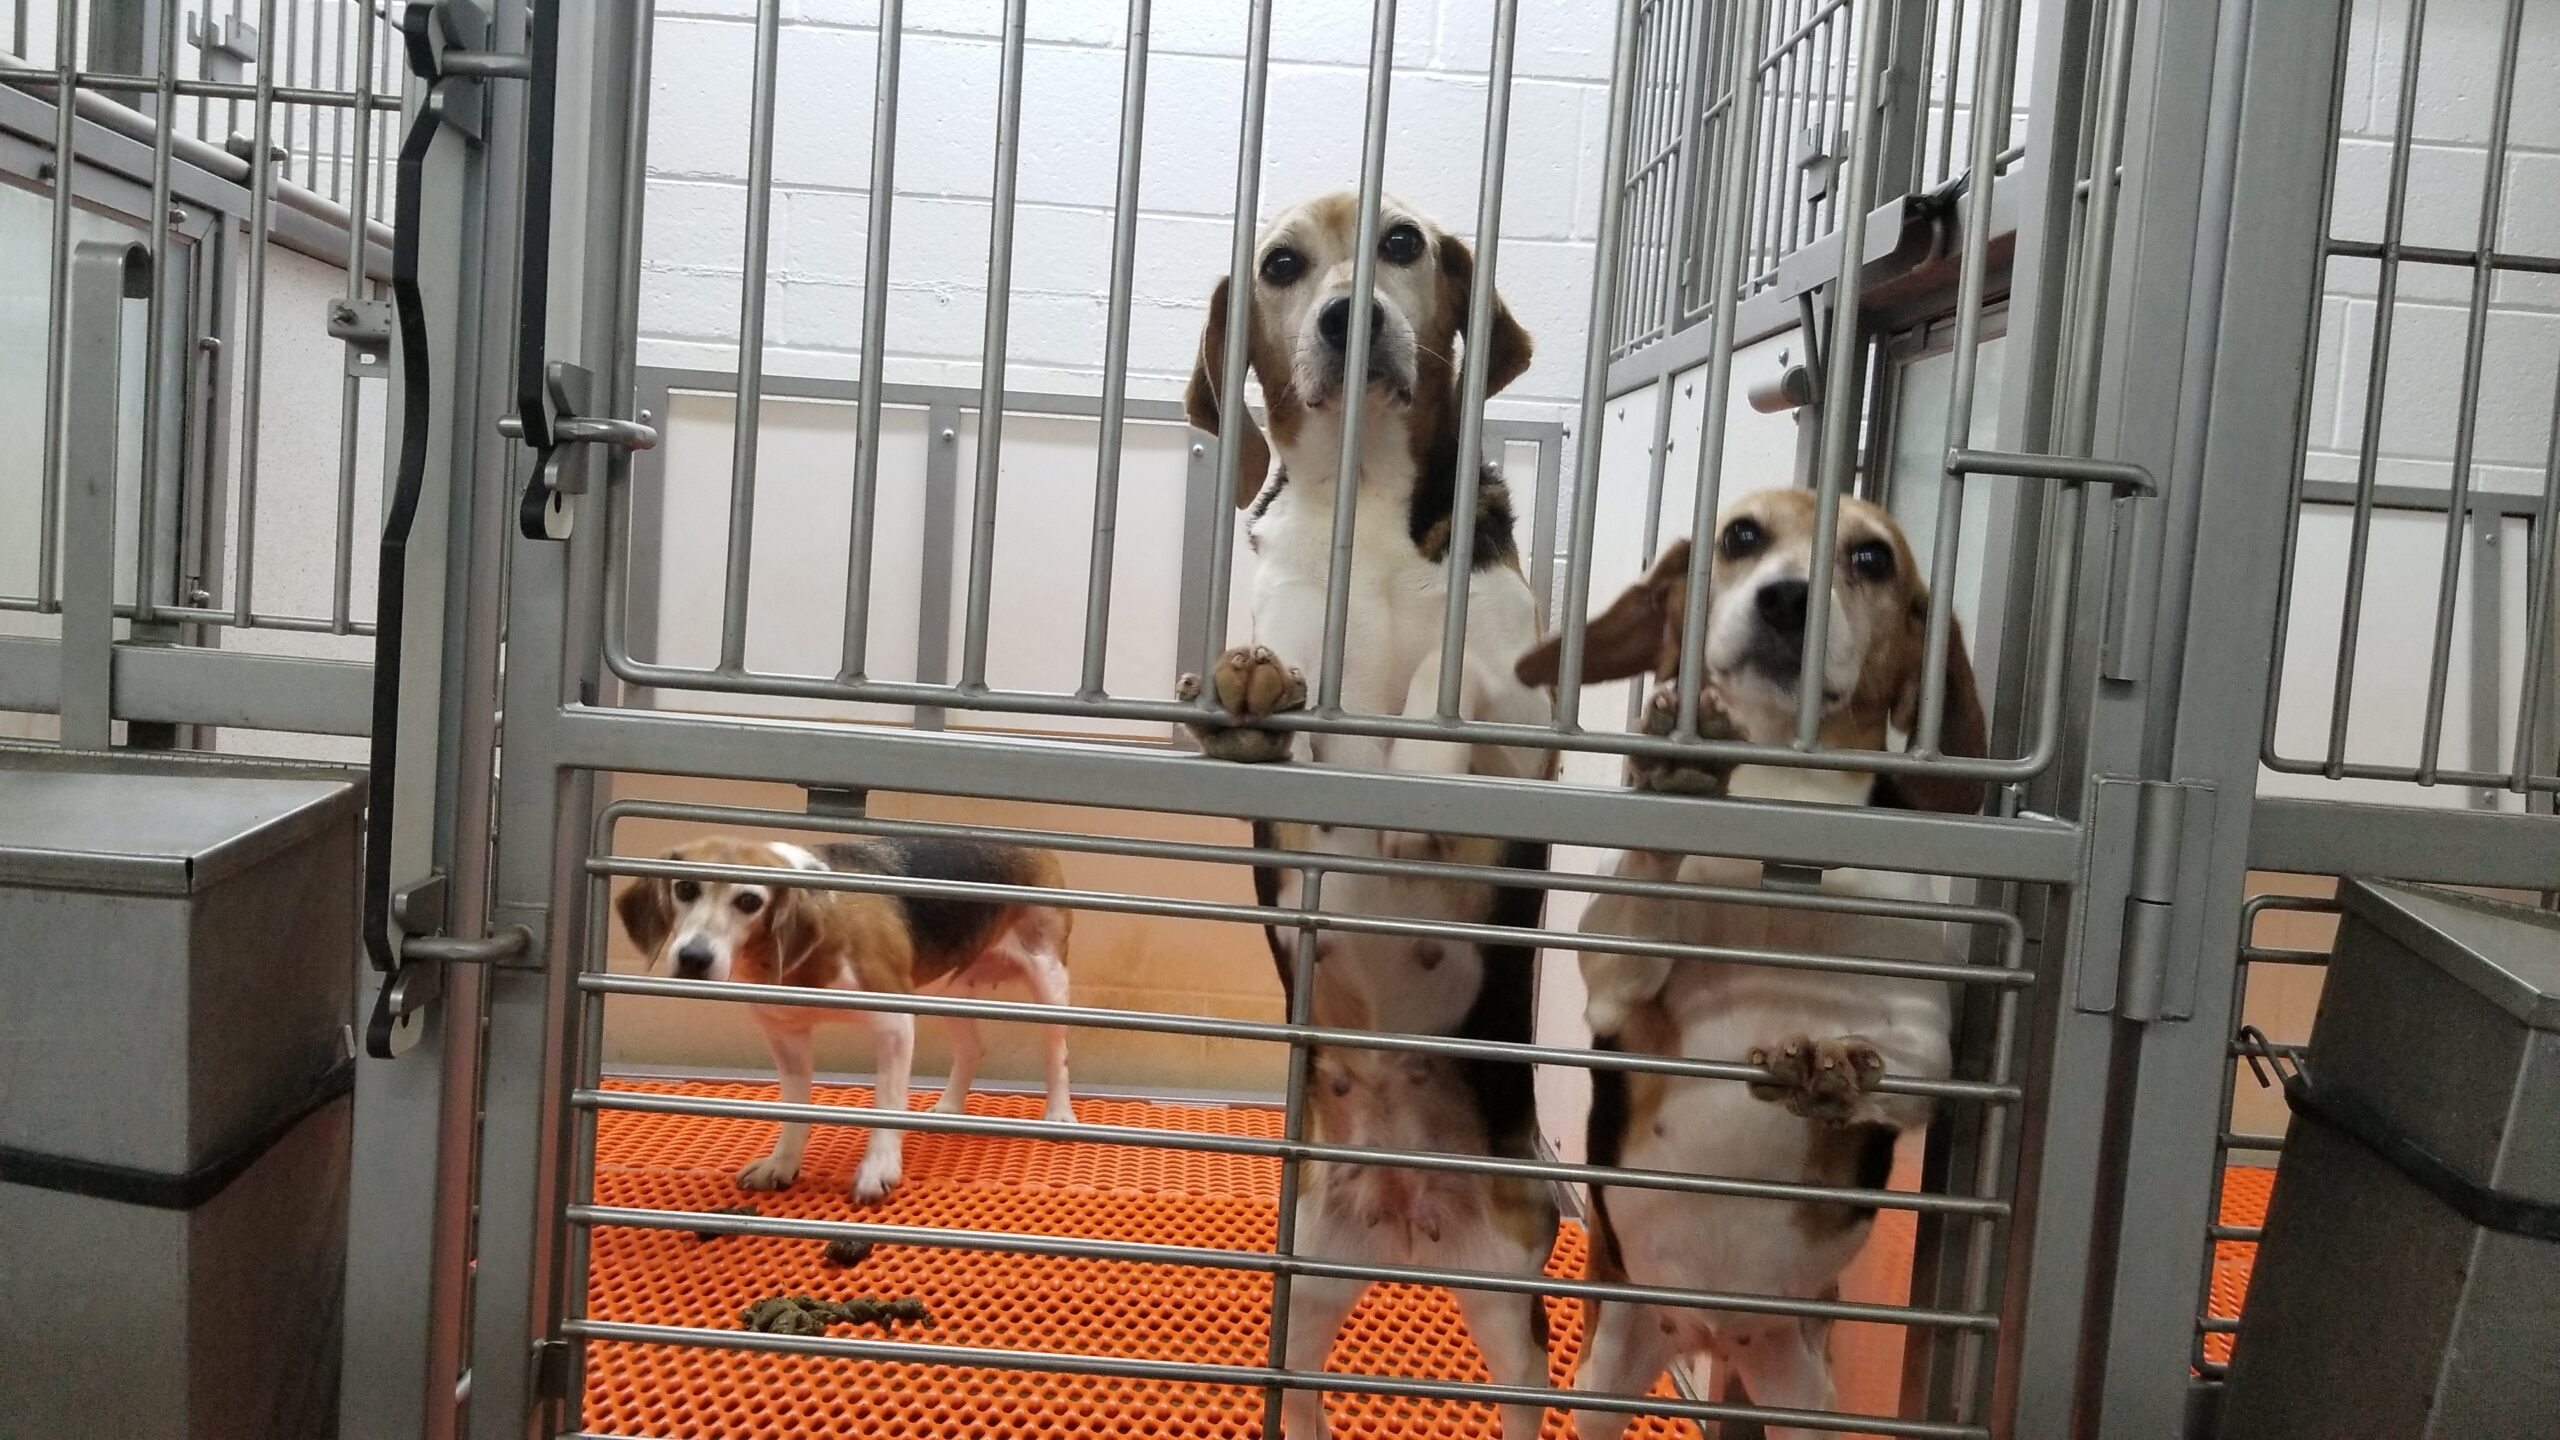 Who regulates animal shelters in Virginia?